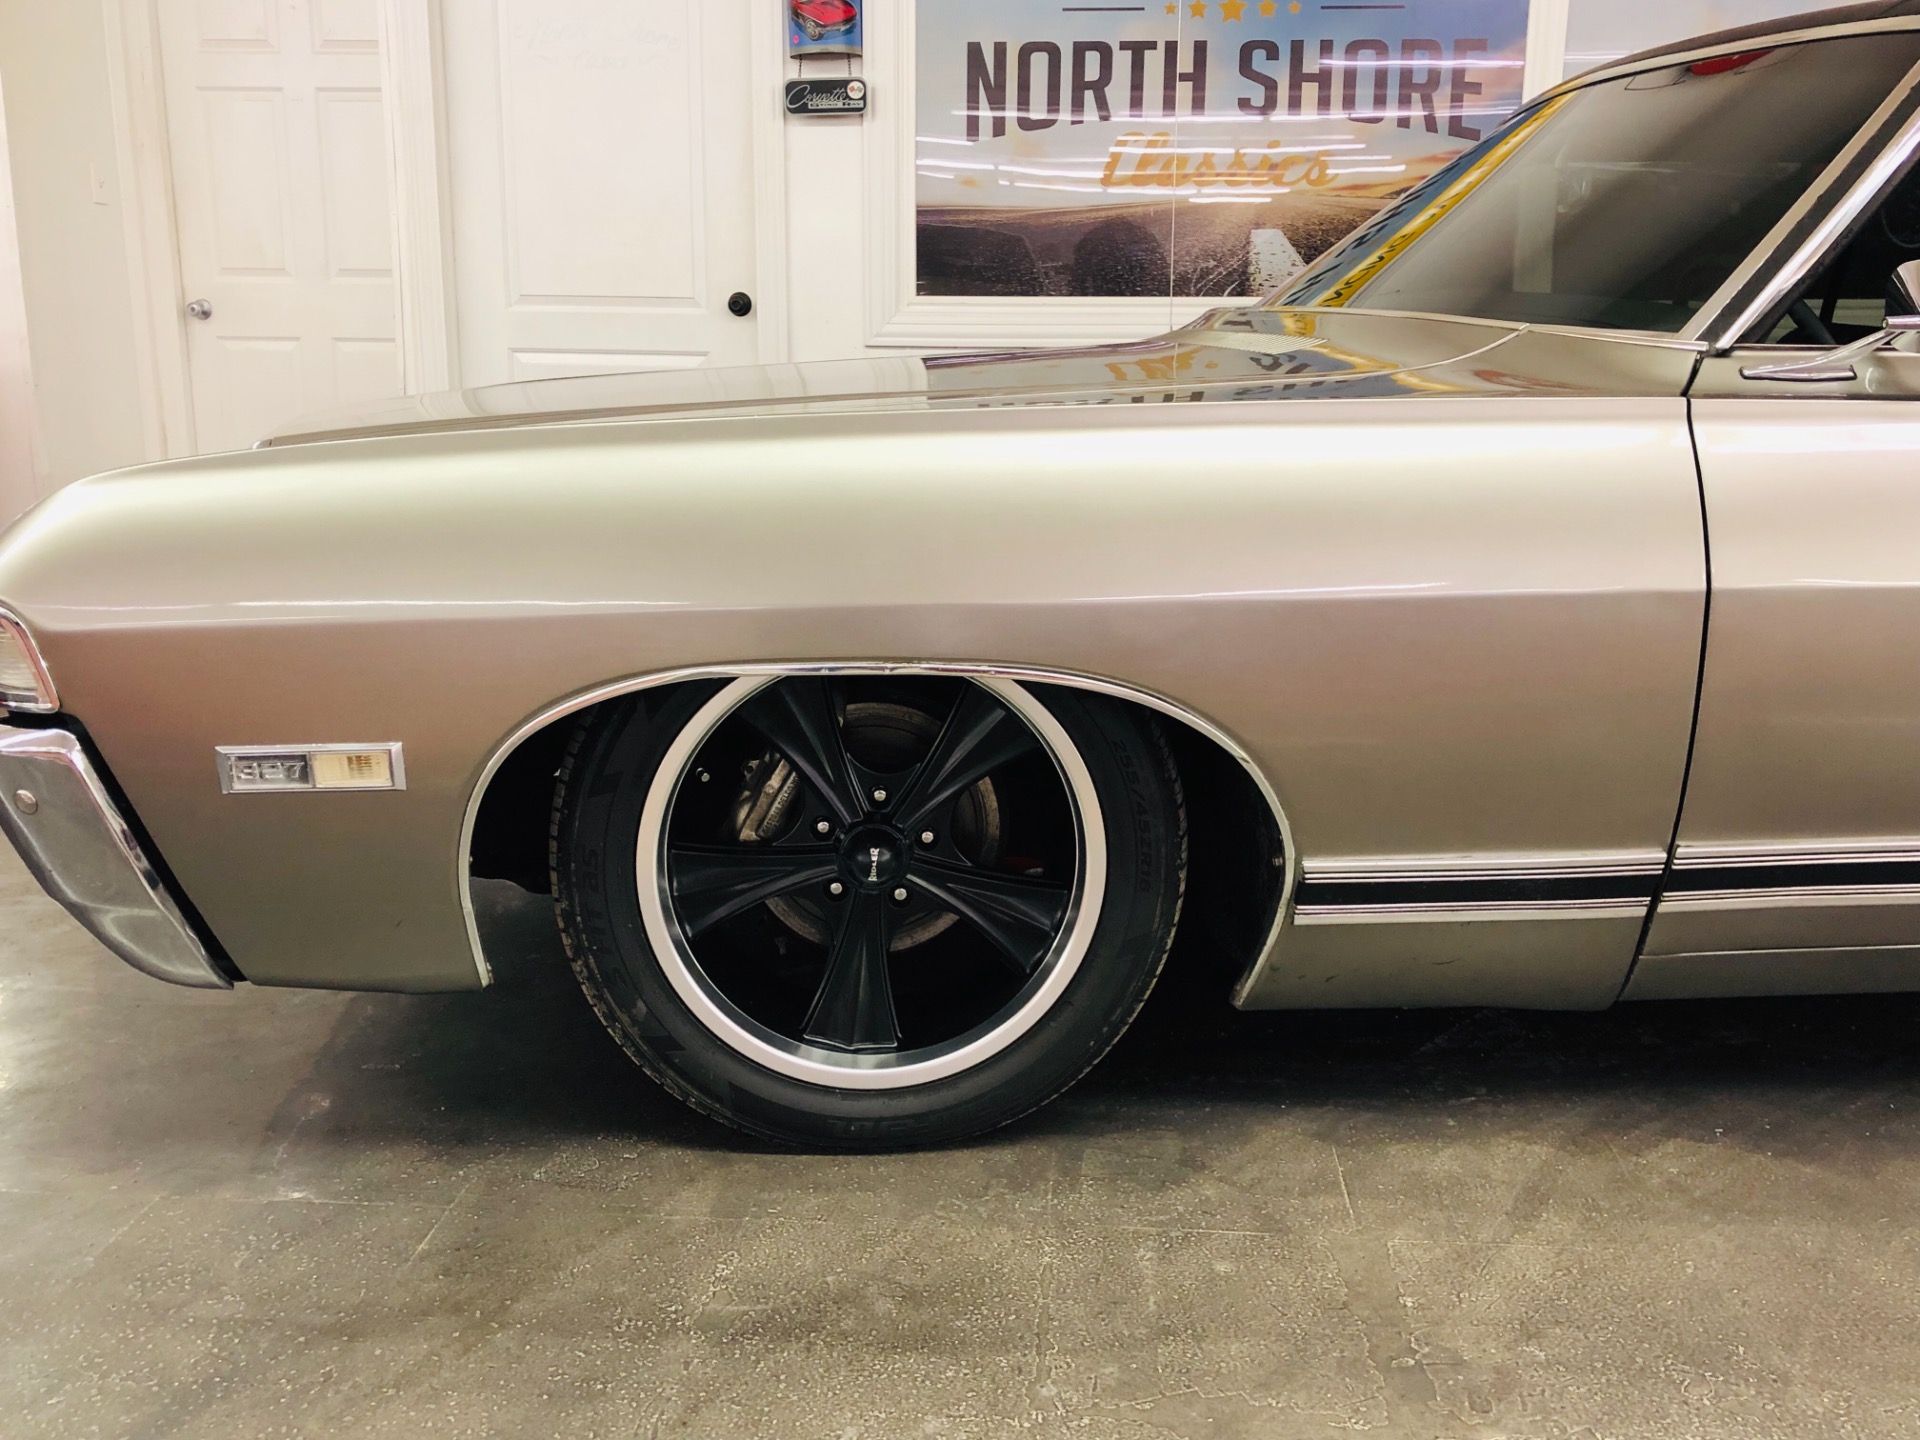 Used 1968 Chevrolet Caprice -NEW LOW PRICE -COOL CUSTOM CAPRICE- AIR RIDE- NEW PAINT- SEE VIDEO | Mundelein, IL